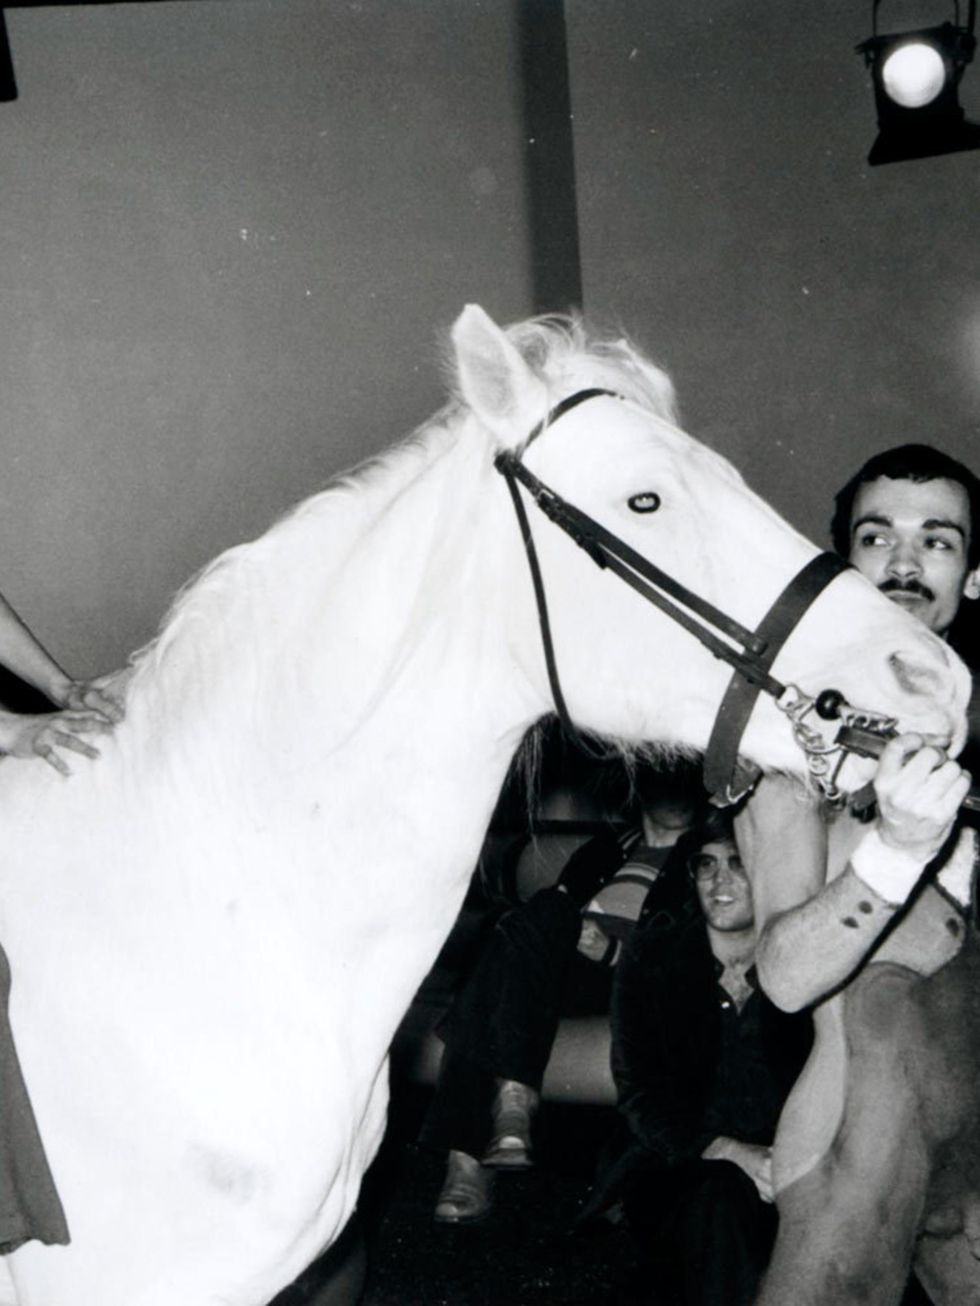 <p>Bianca Jagger celebrates her birthday on a white horse in Studio 54 NYC, 1977.</p>